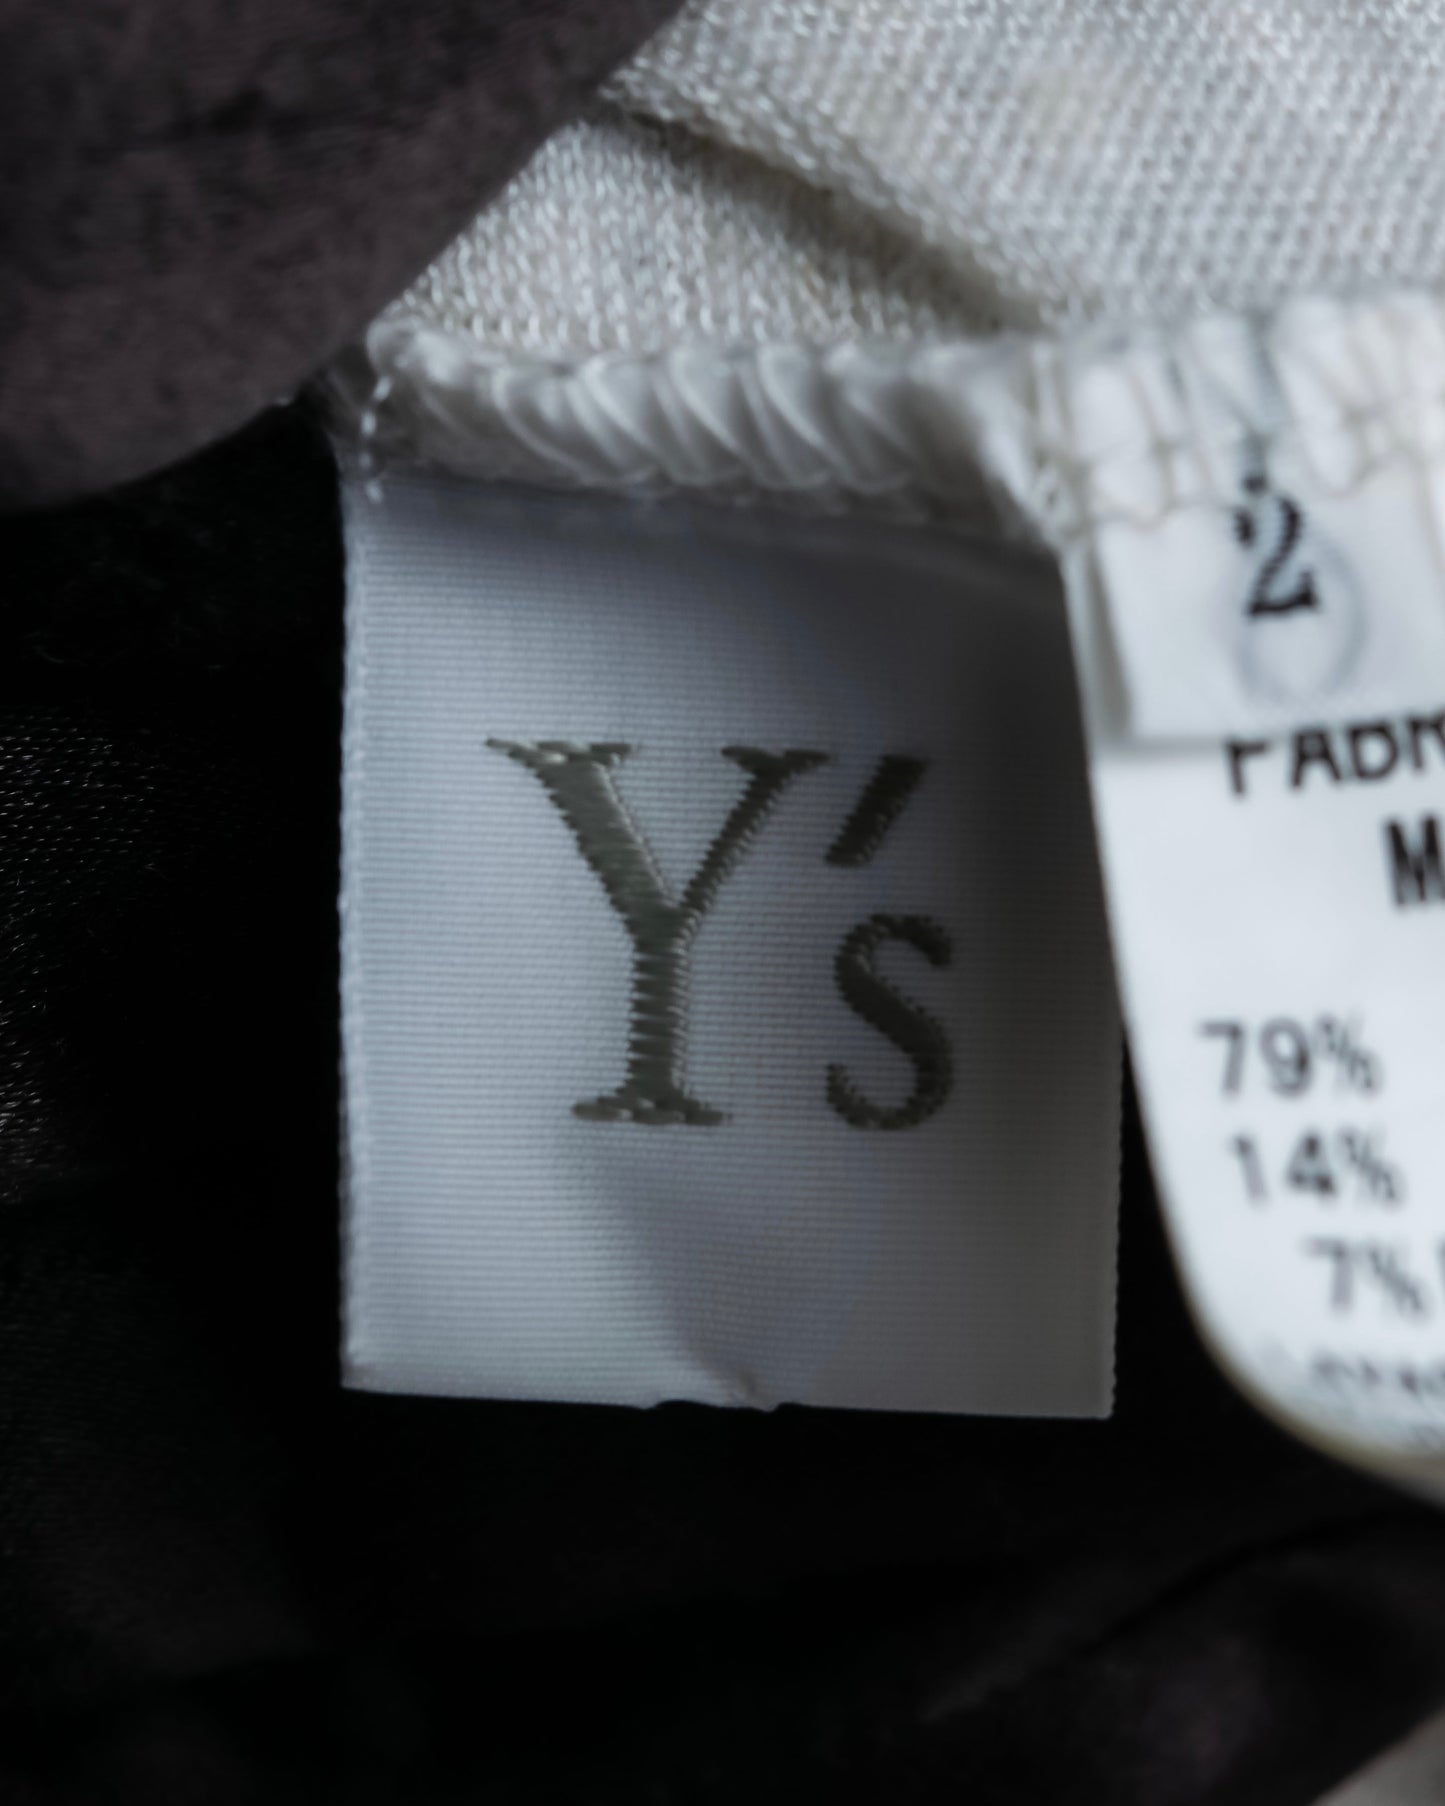 "Y's" Double layered beautiful silhouette tops